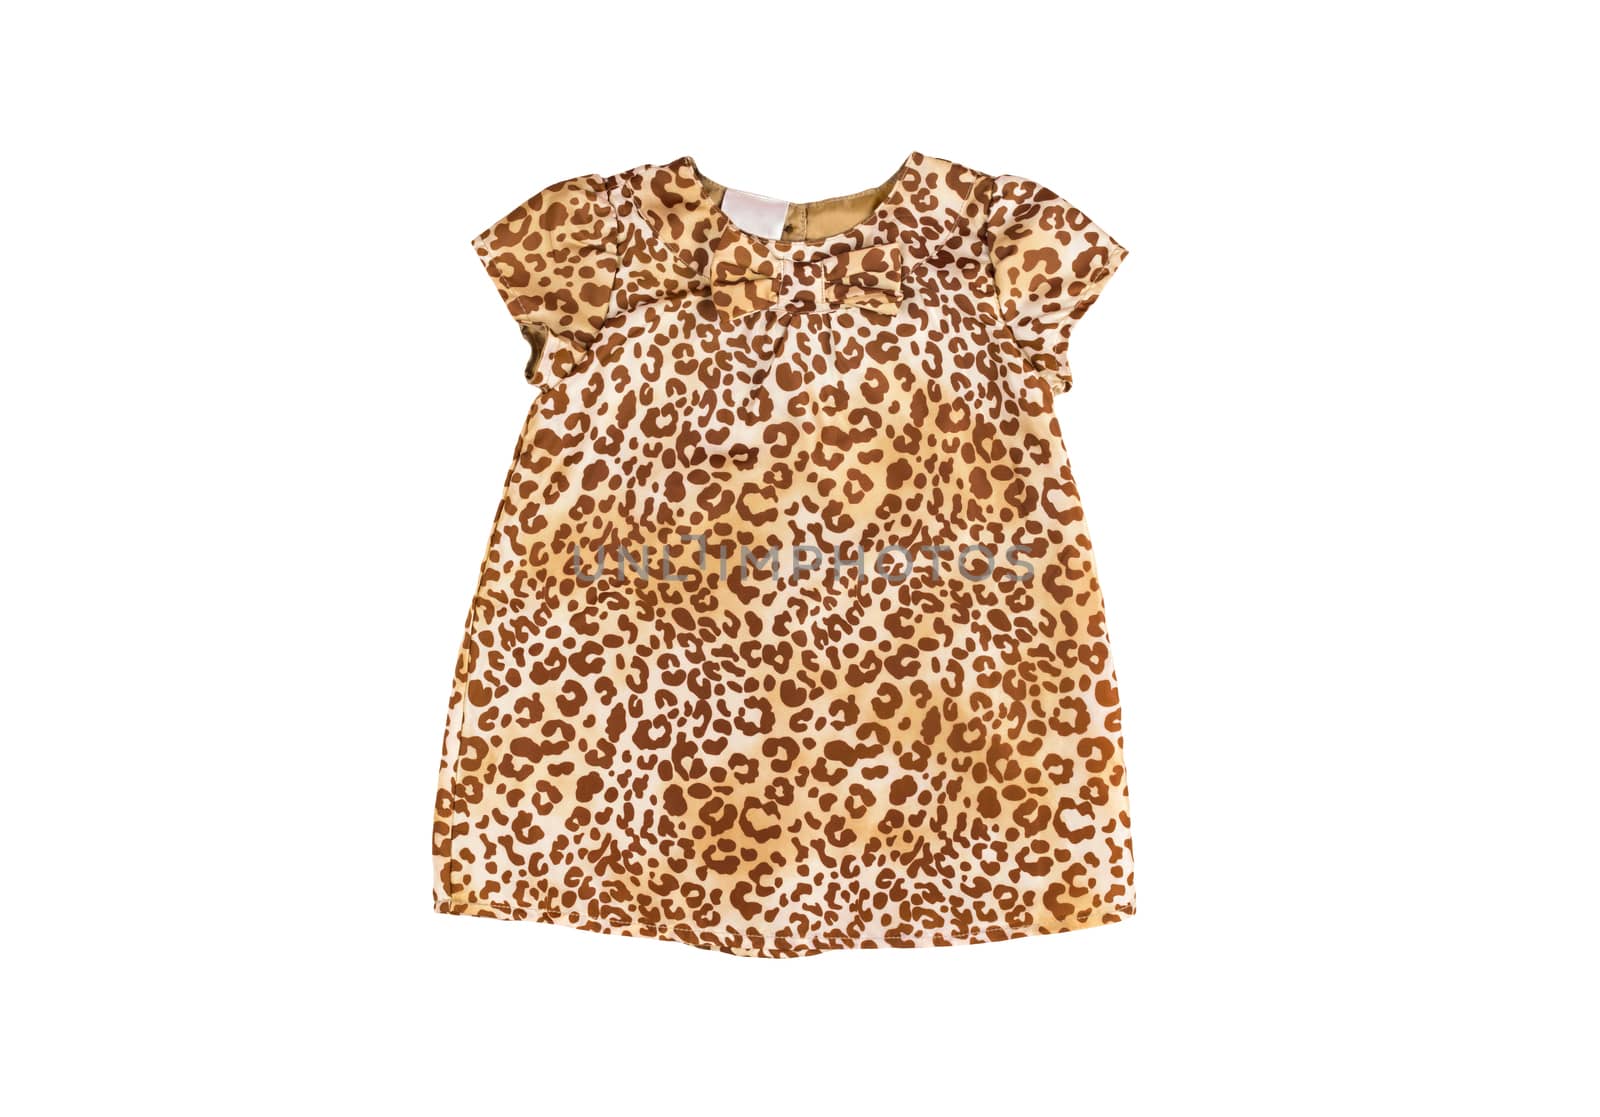 Stylish baby summer elegant dress with leopard print isolated on a white background